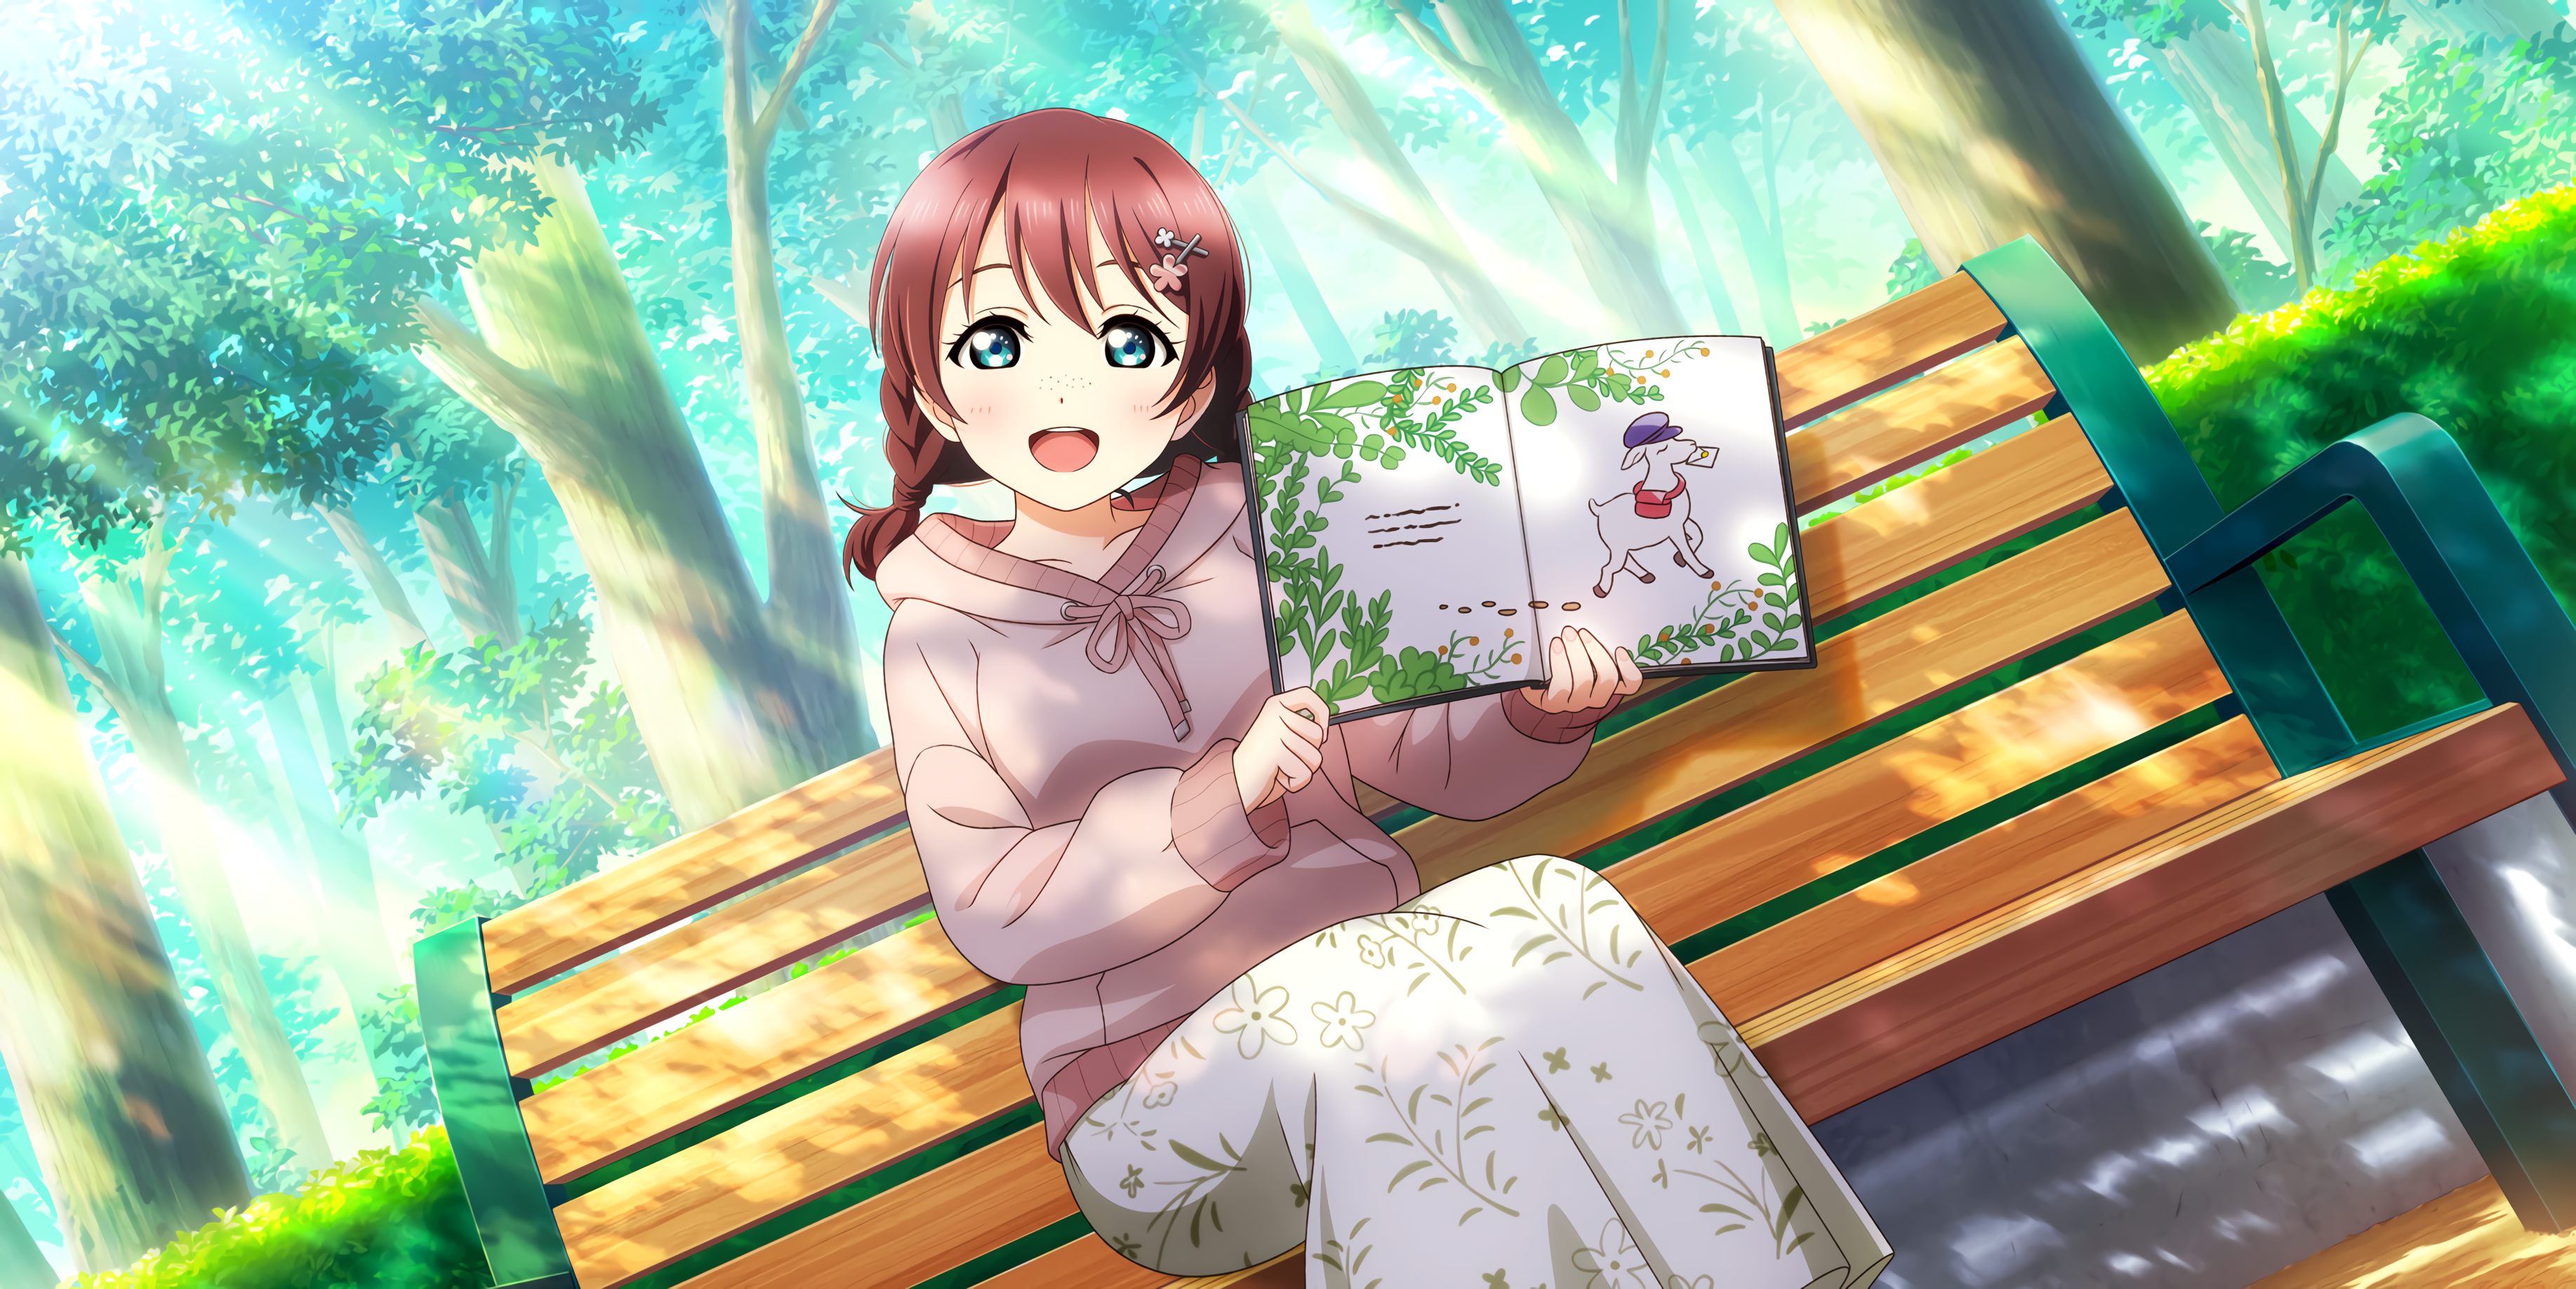 Emma Verde Love Live Redhead Blue Eyes Sitting Book In Hand Skirt Blushing Bench Trees Looking At Vi 3670x1836